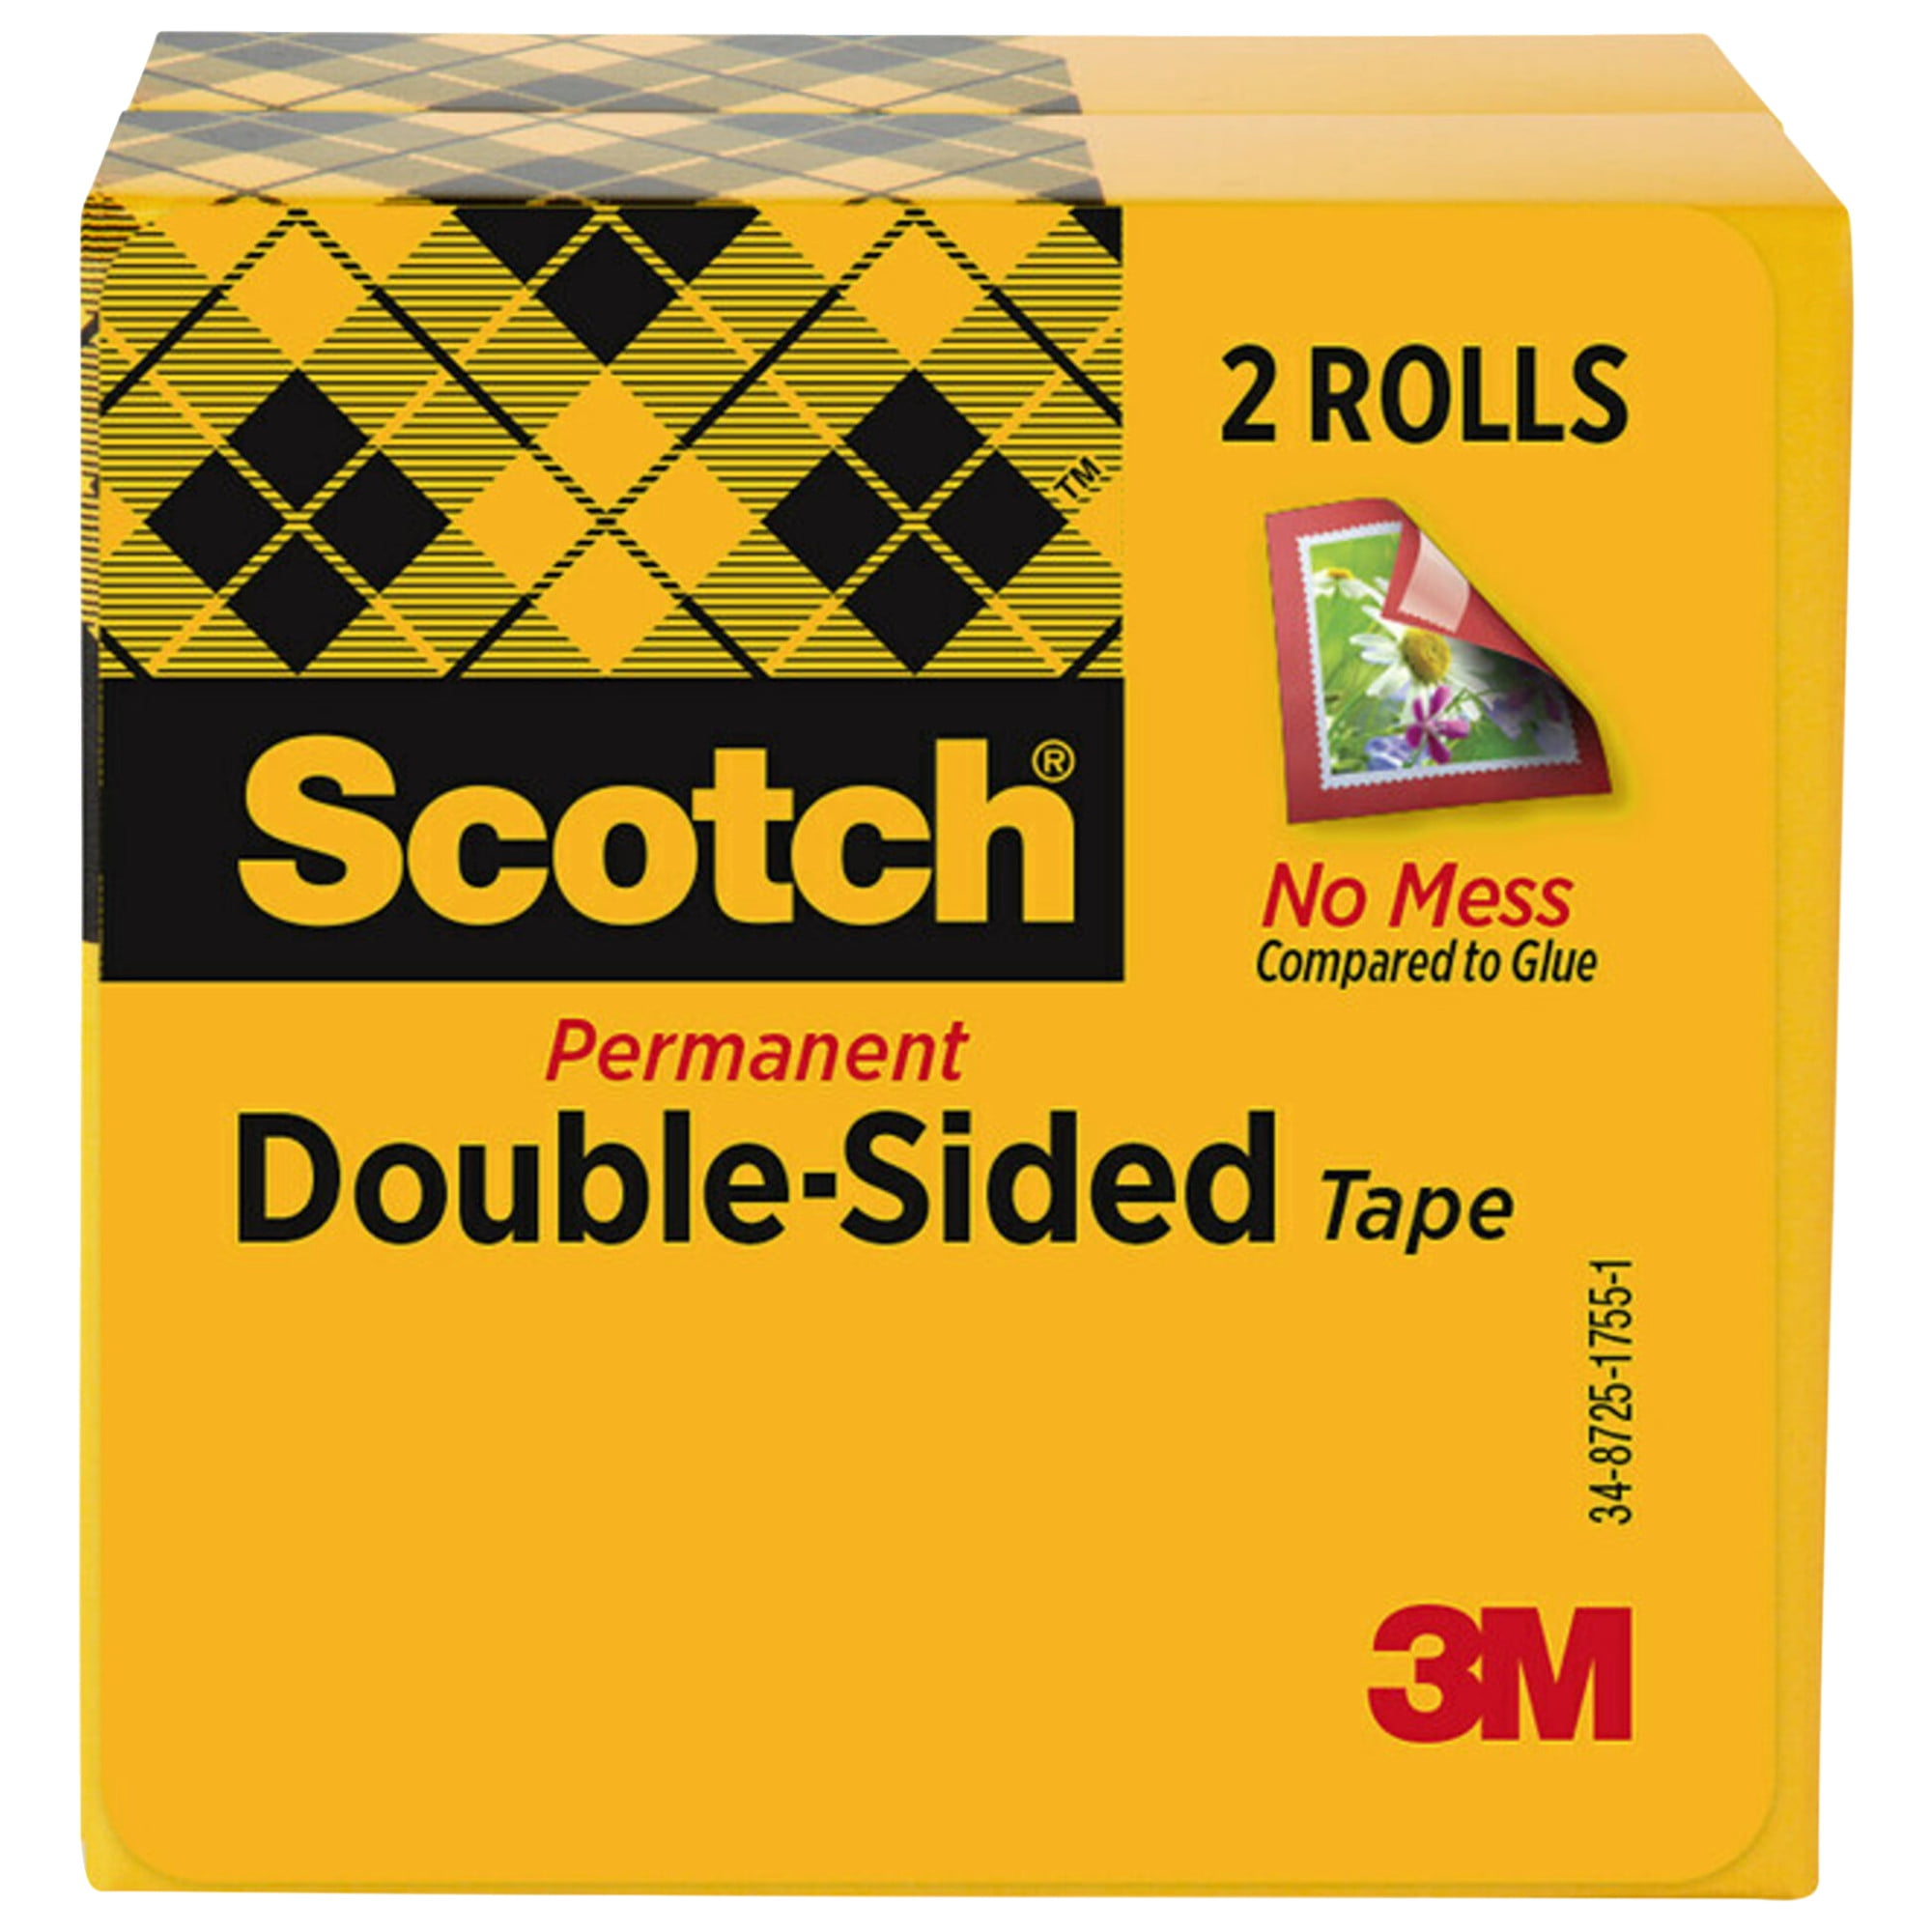 Scotch Double Sided Tape Refill, 1/2 x 900, Clear